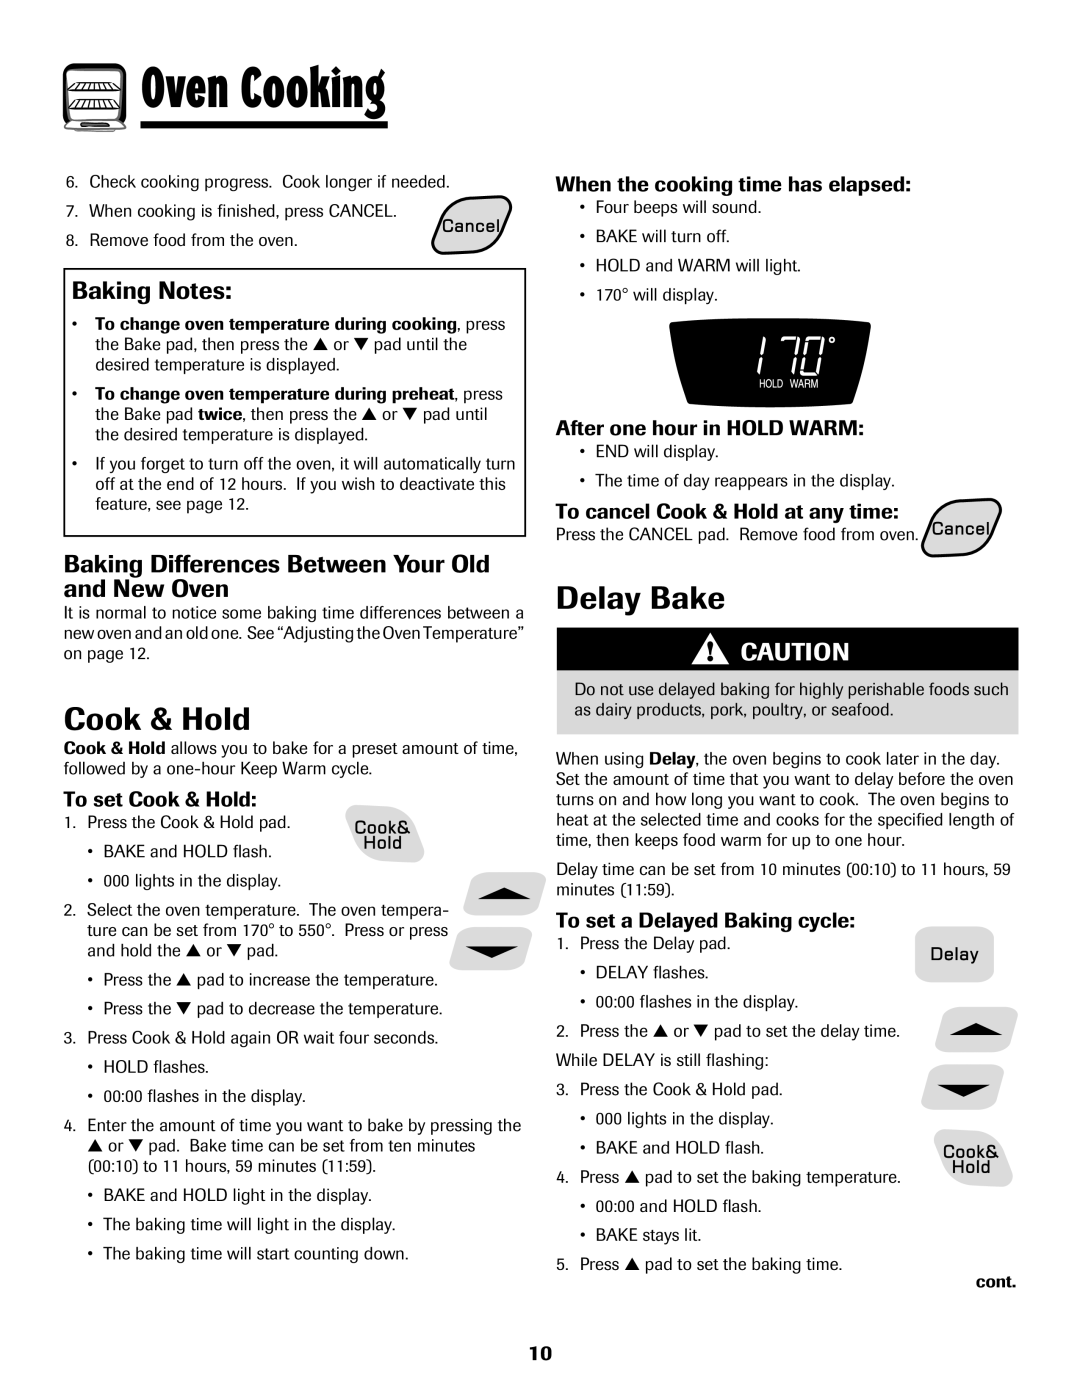 Amana Coil Delay Bake, Baking Notes, Baking Differences Between Your Old and New Oven, To set Cook & Hold 